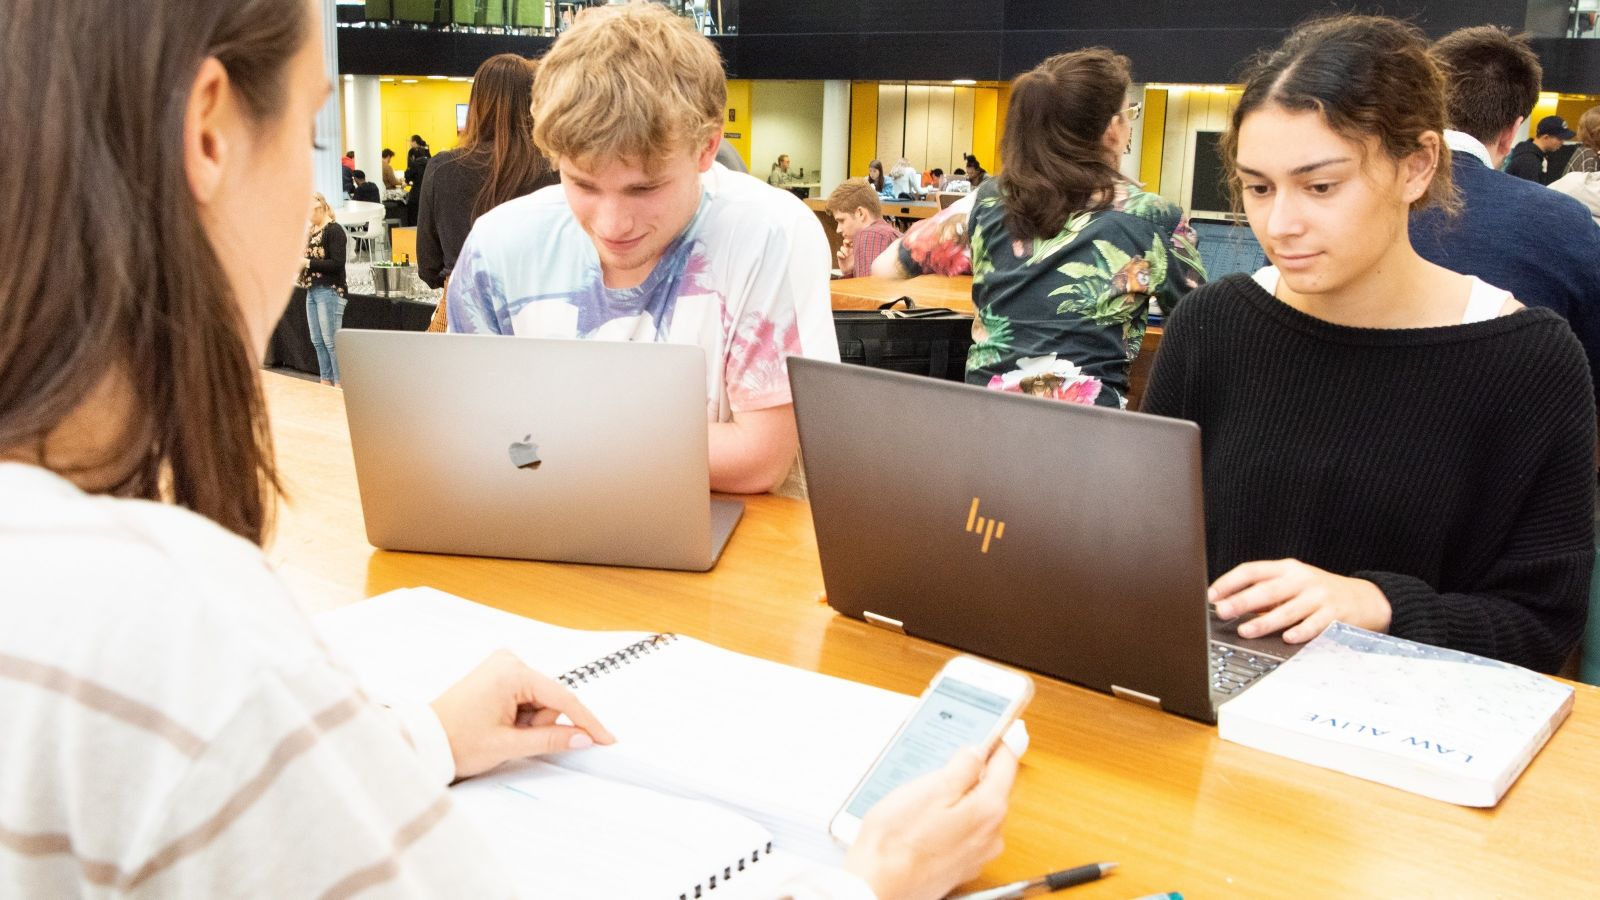 Students in the hub, two sitting at laptops, while one uses a smartphone.